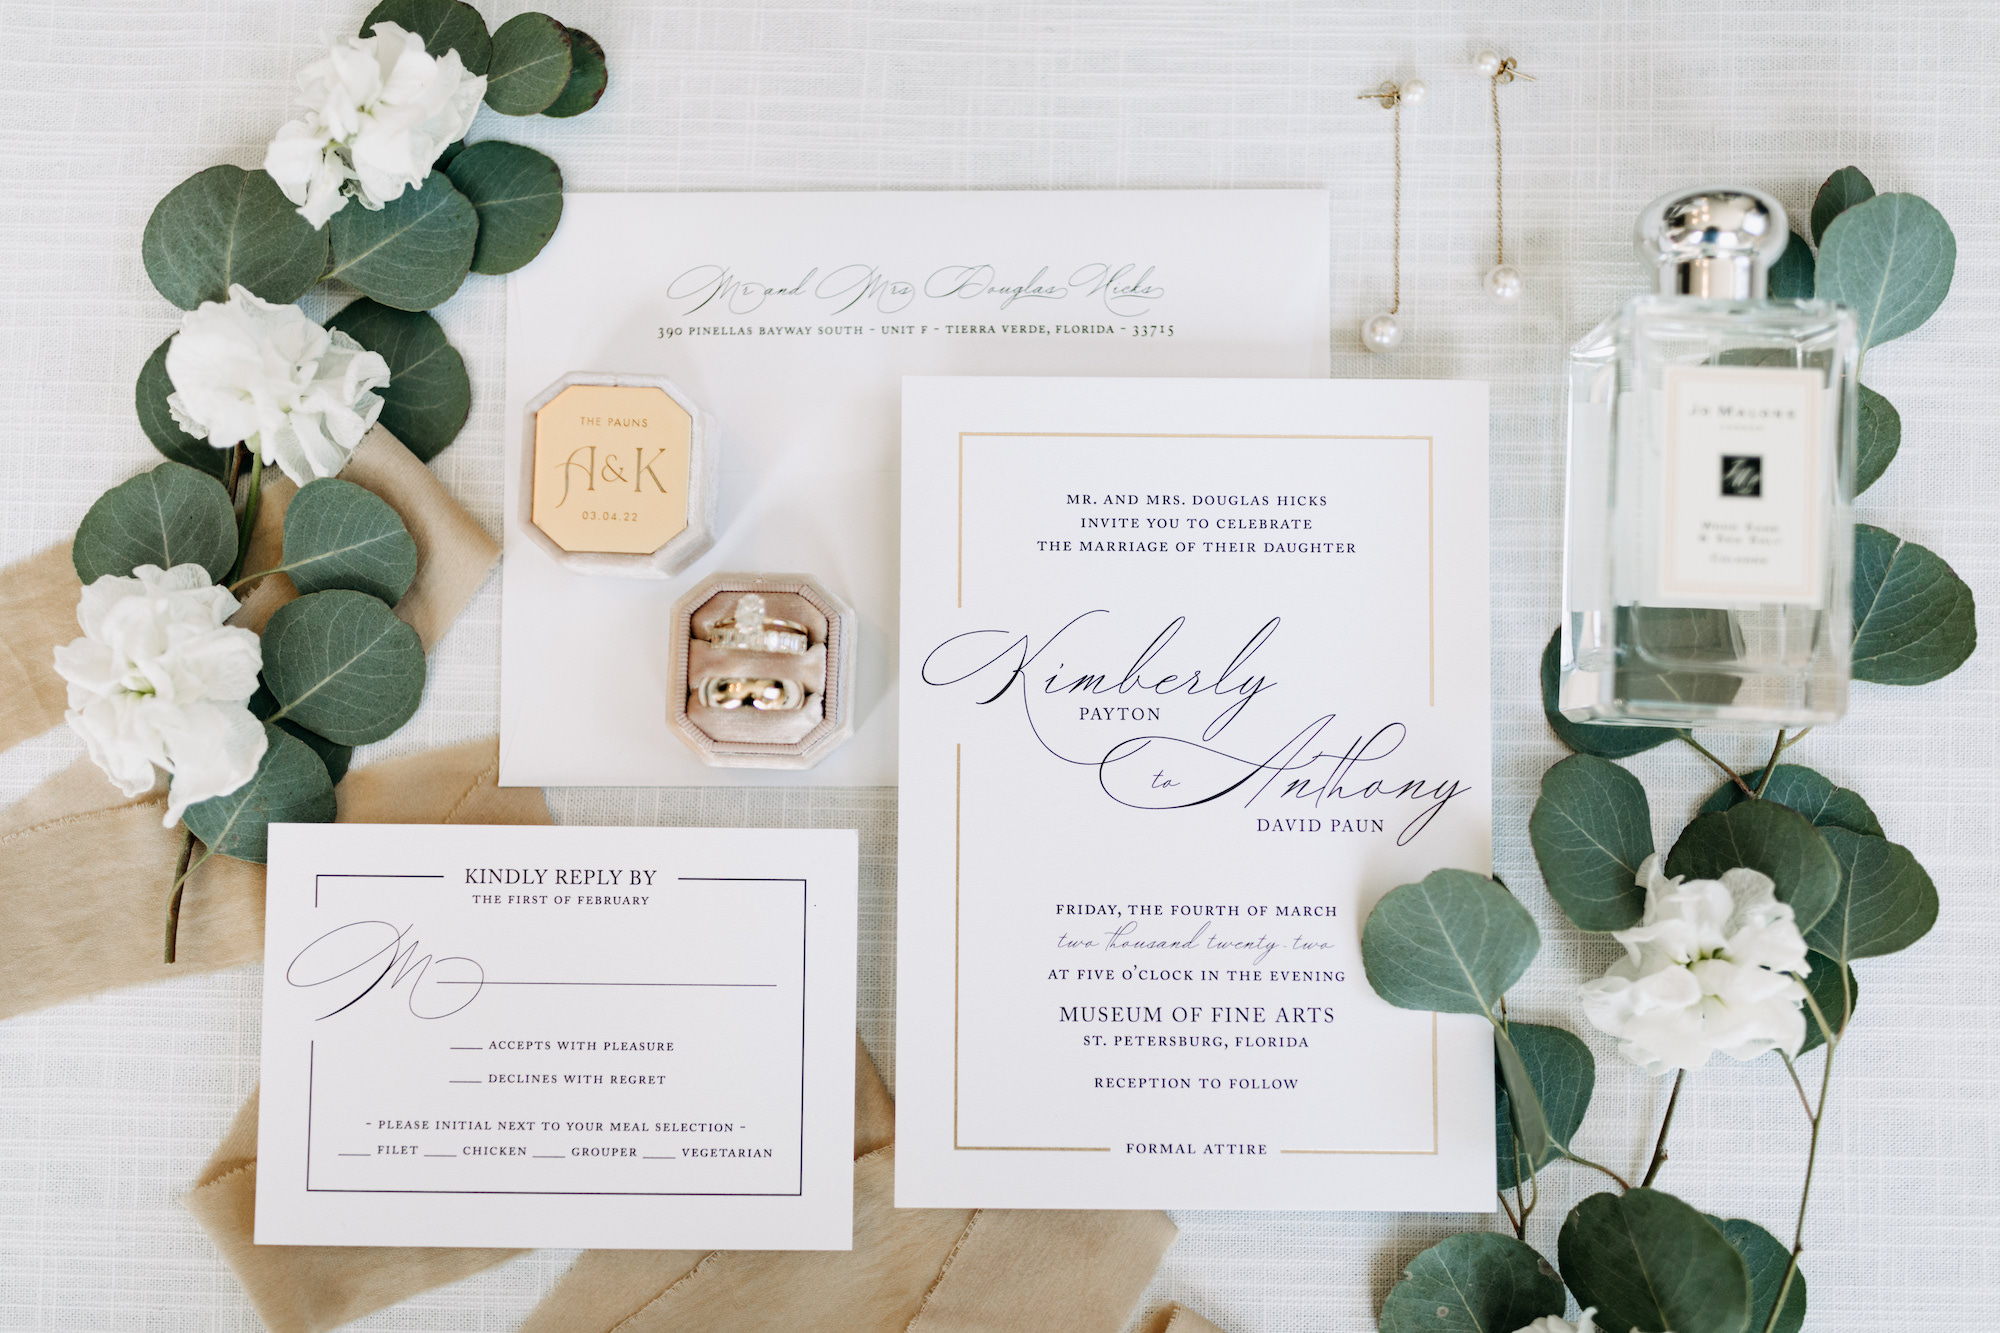 Classic White with a Gold Border Wedding Invitation Suite Ideas